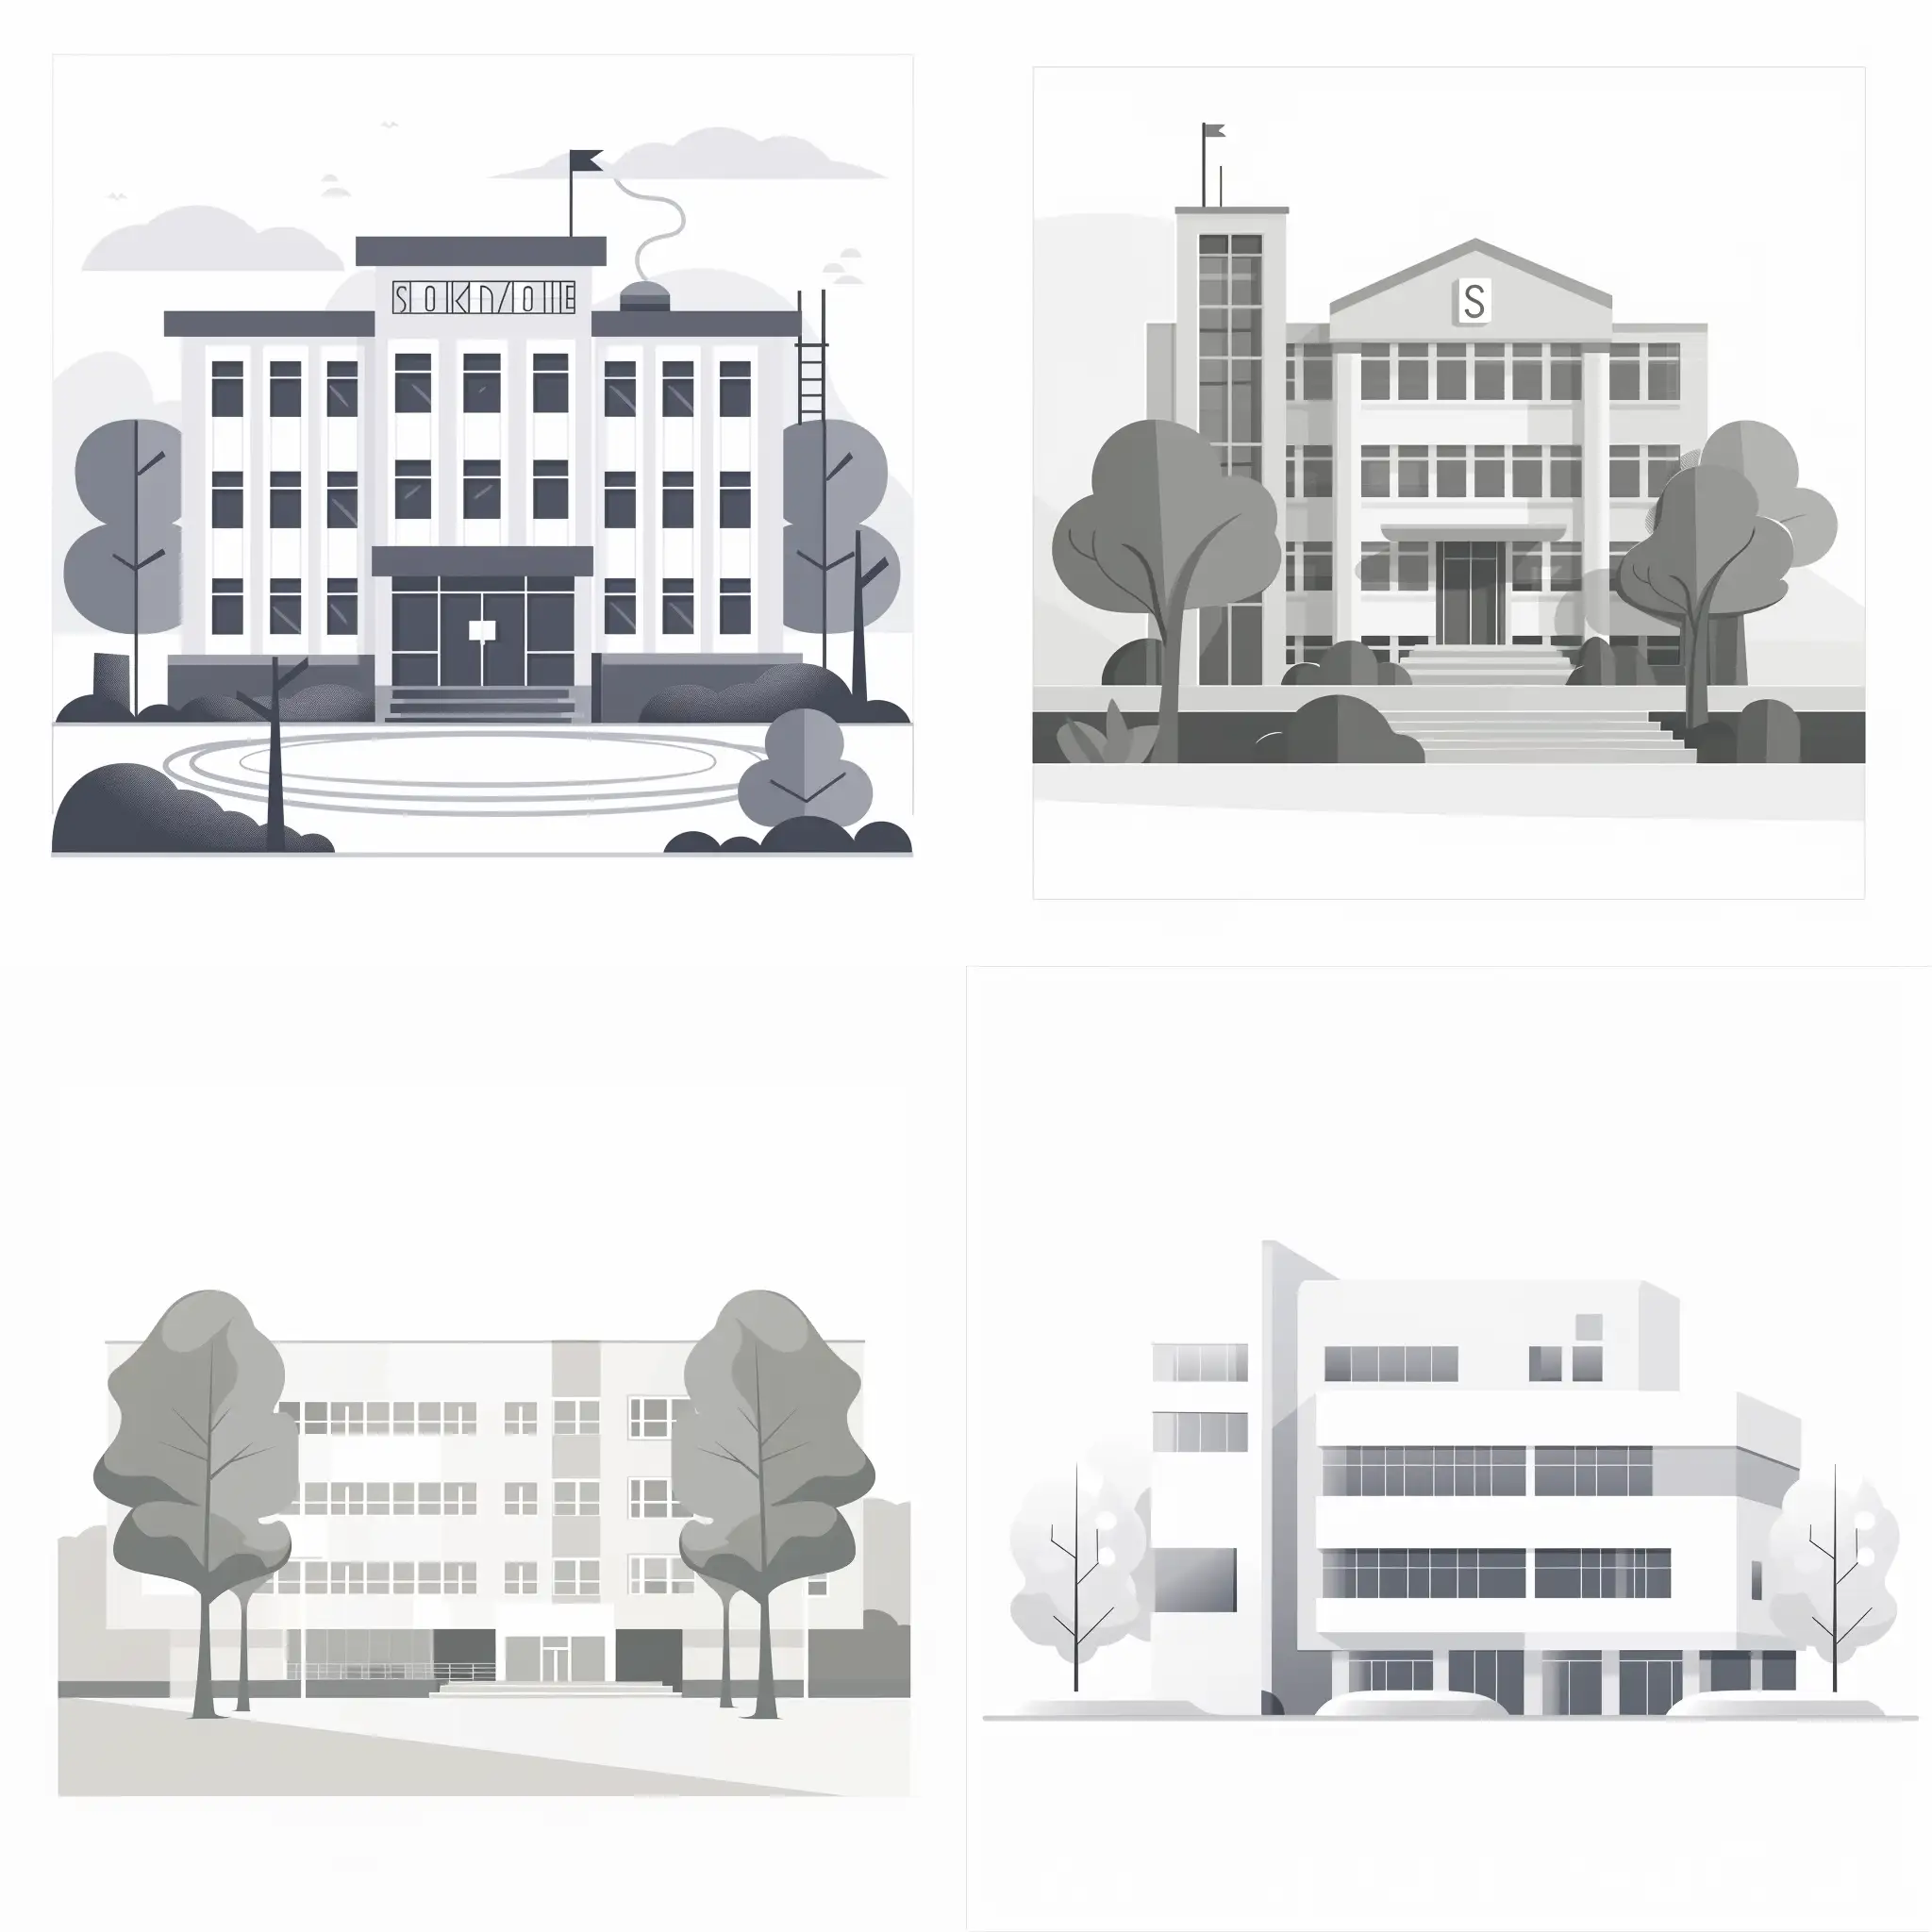 Modern-School-Building-in-Gray-and-White-Tones